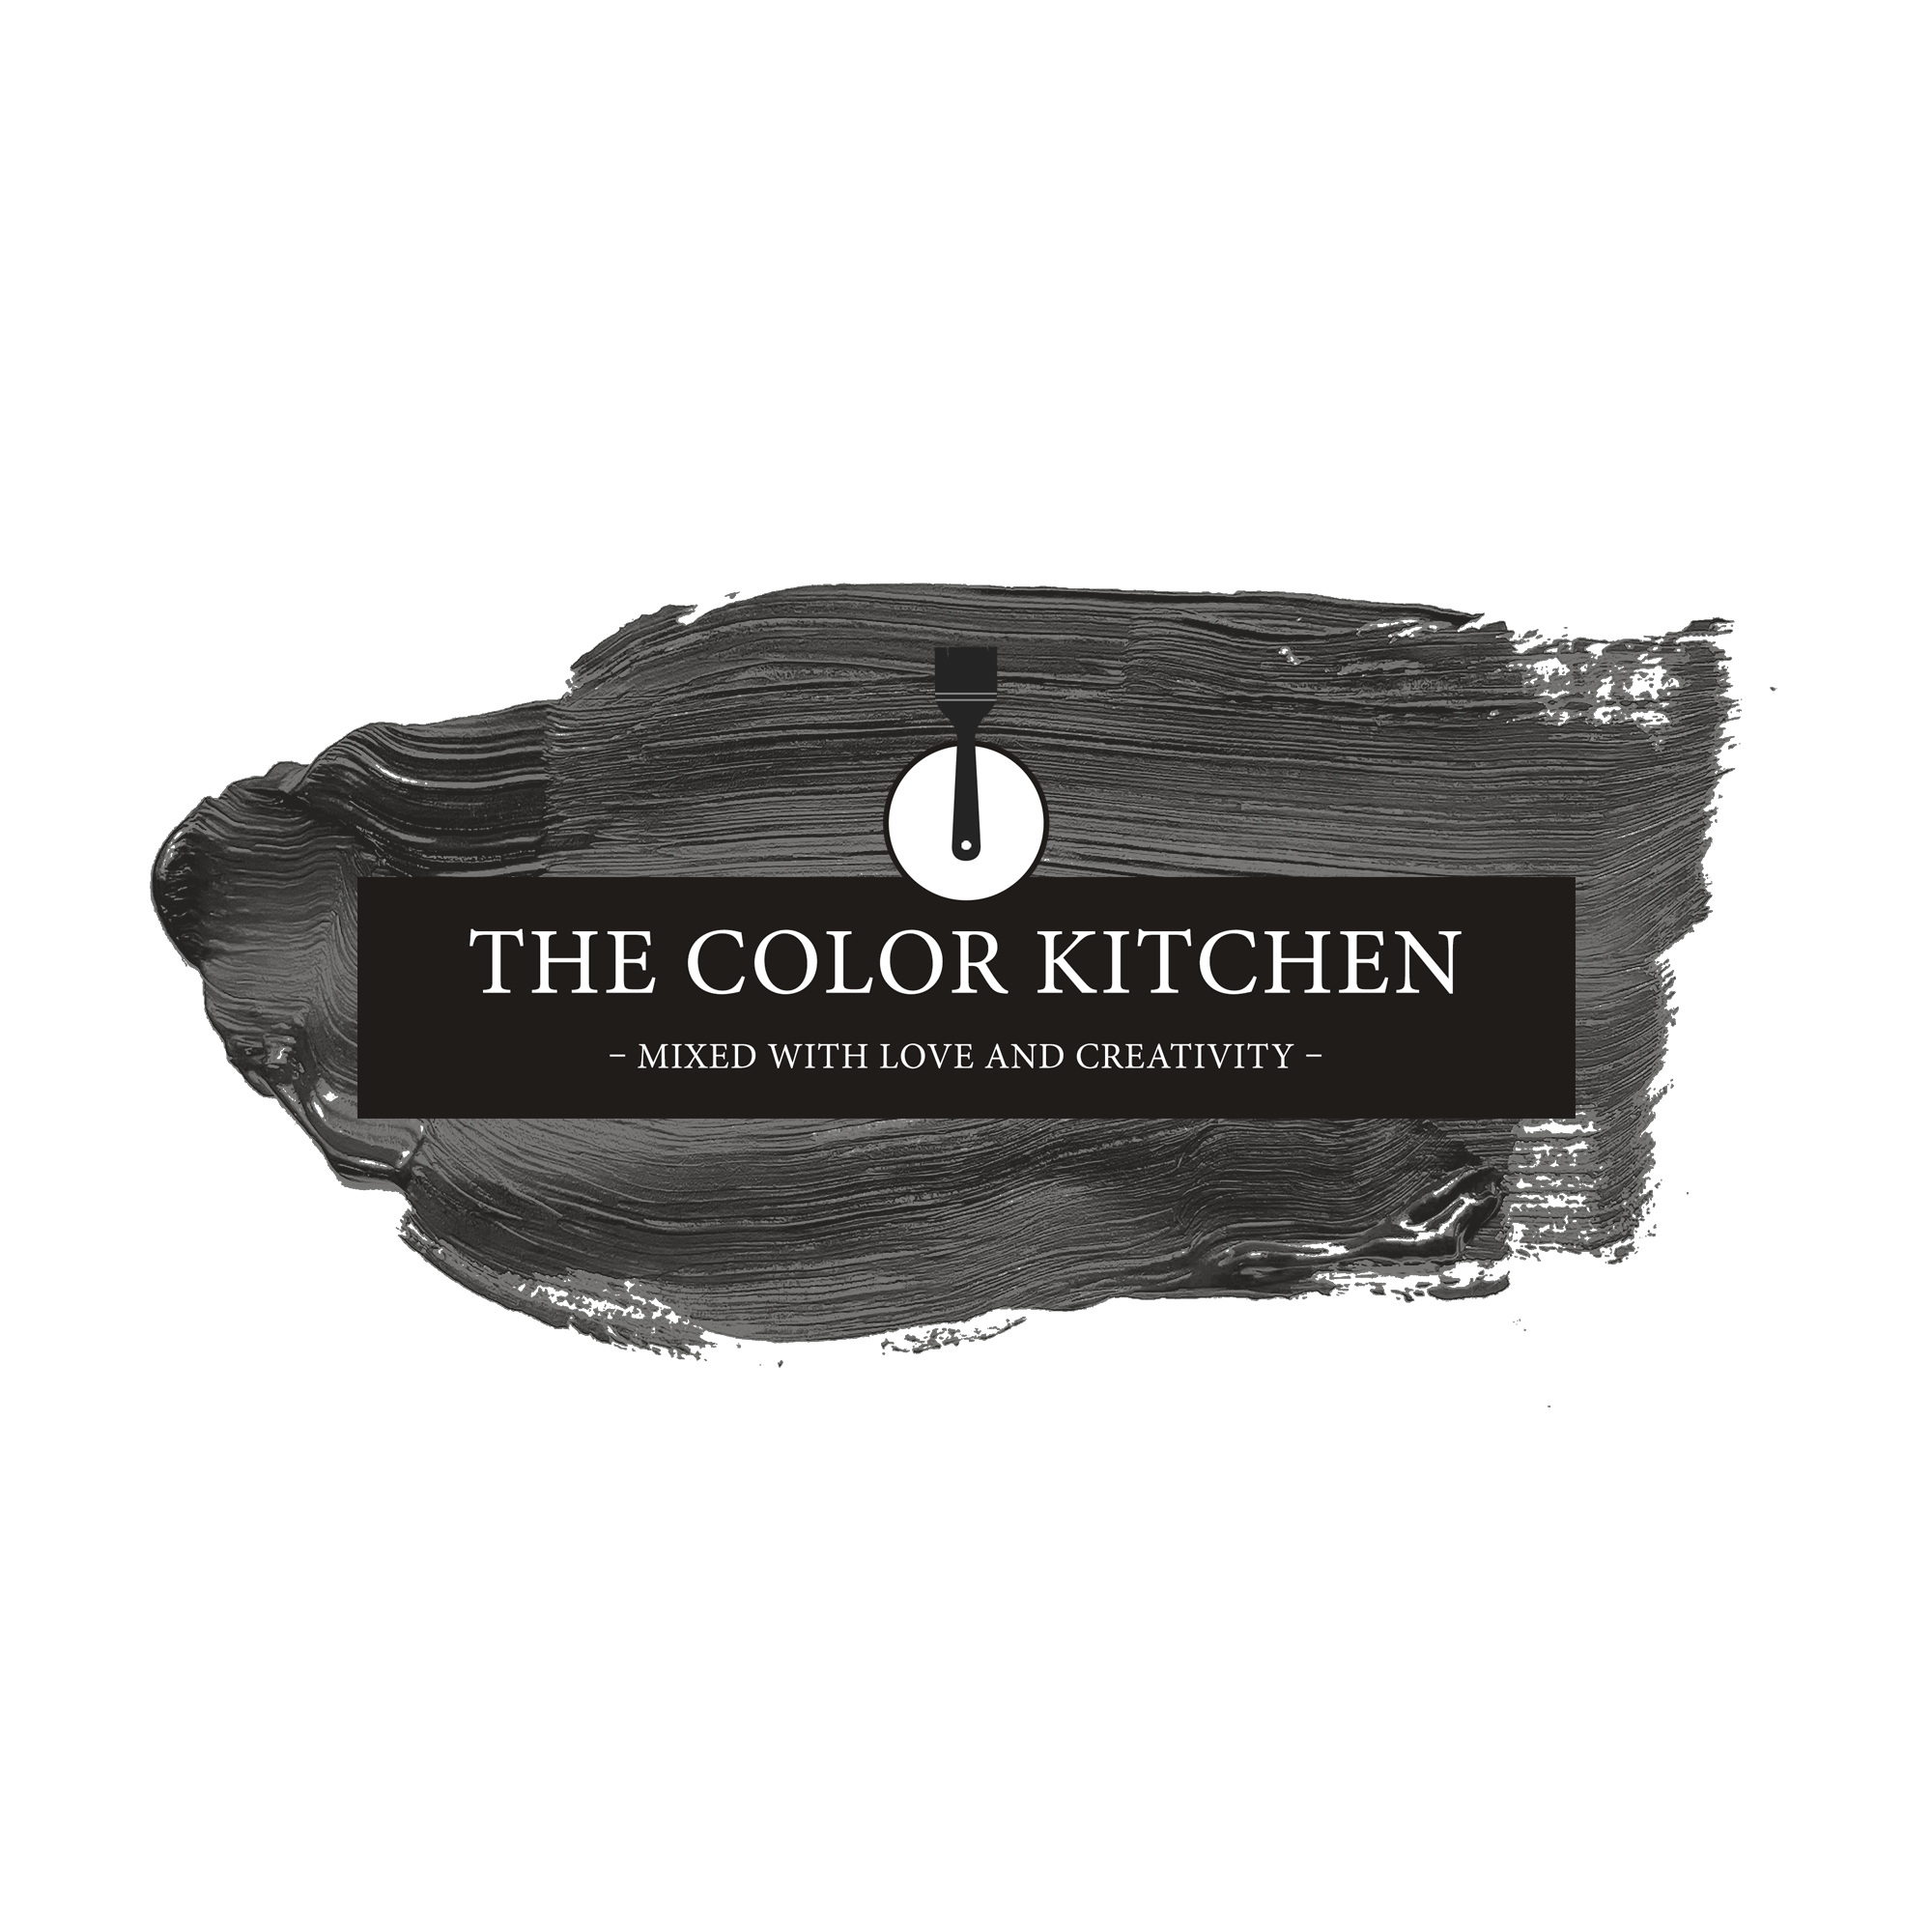 The Color Kitchen Poppy Seed 2,5 l